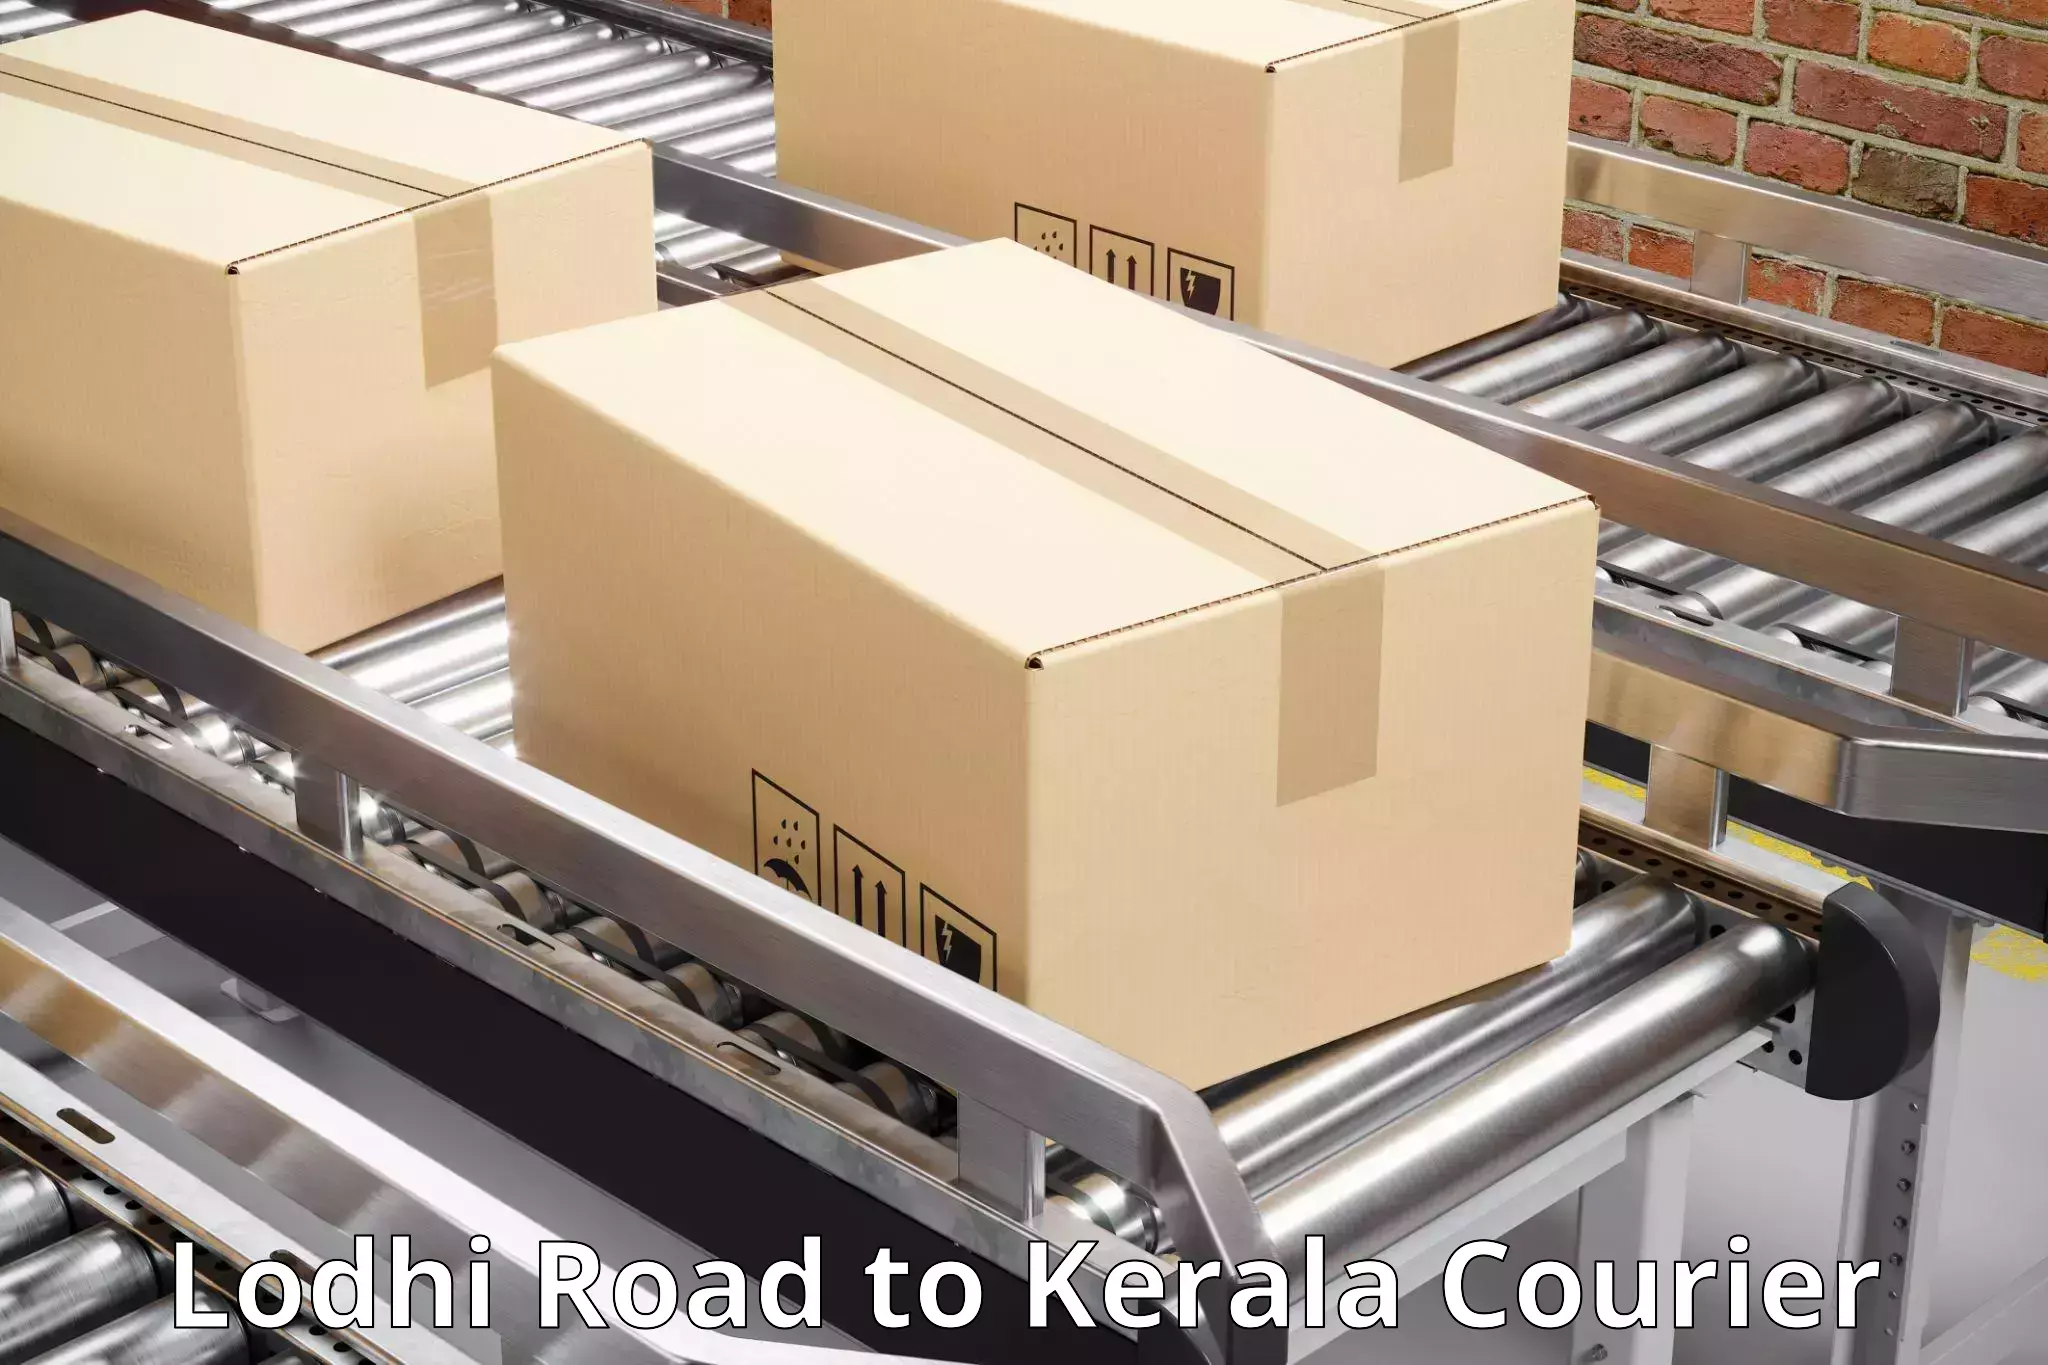 State-of-the-art courier technology Lodhi Road to Piravom